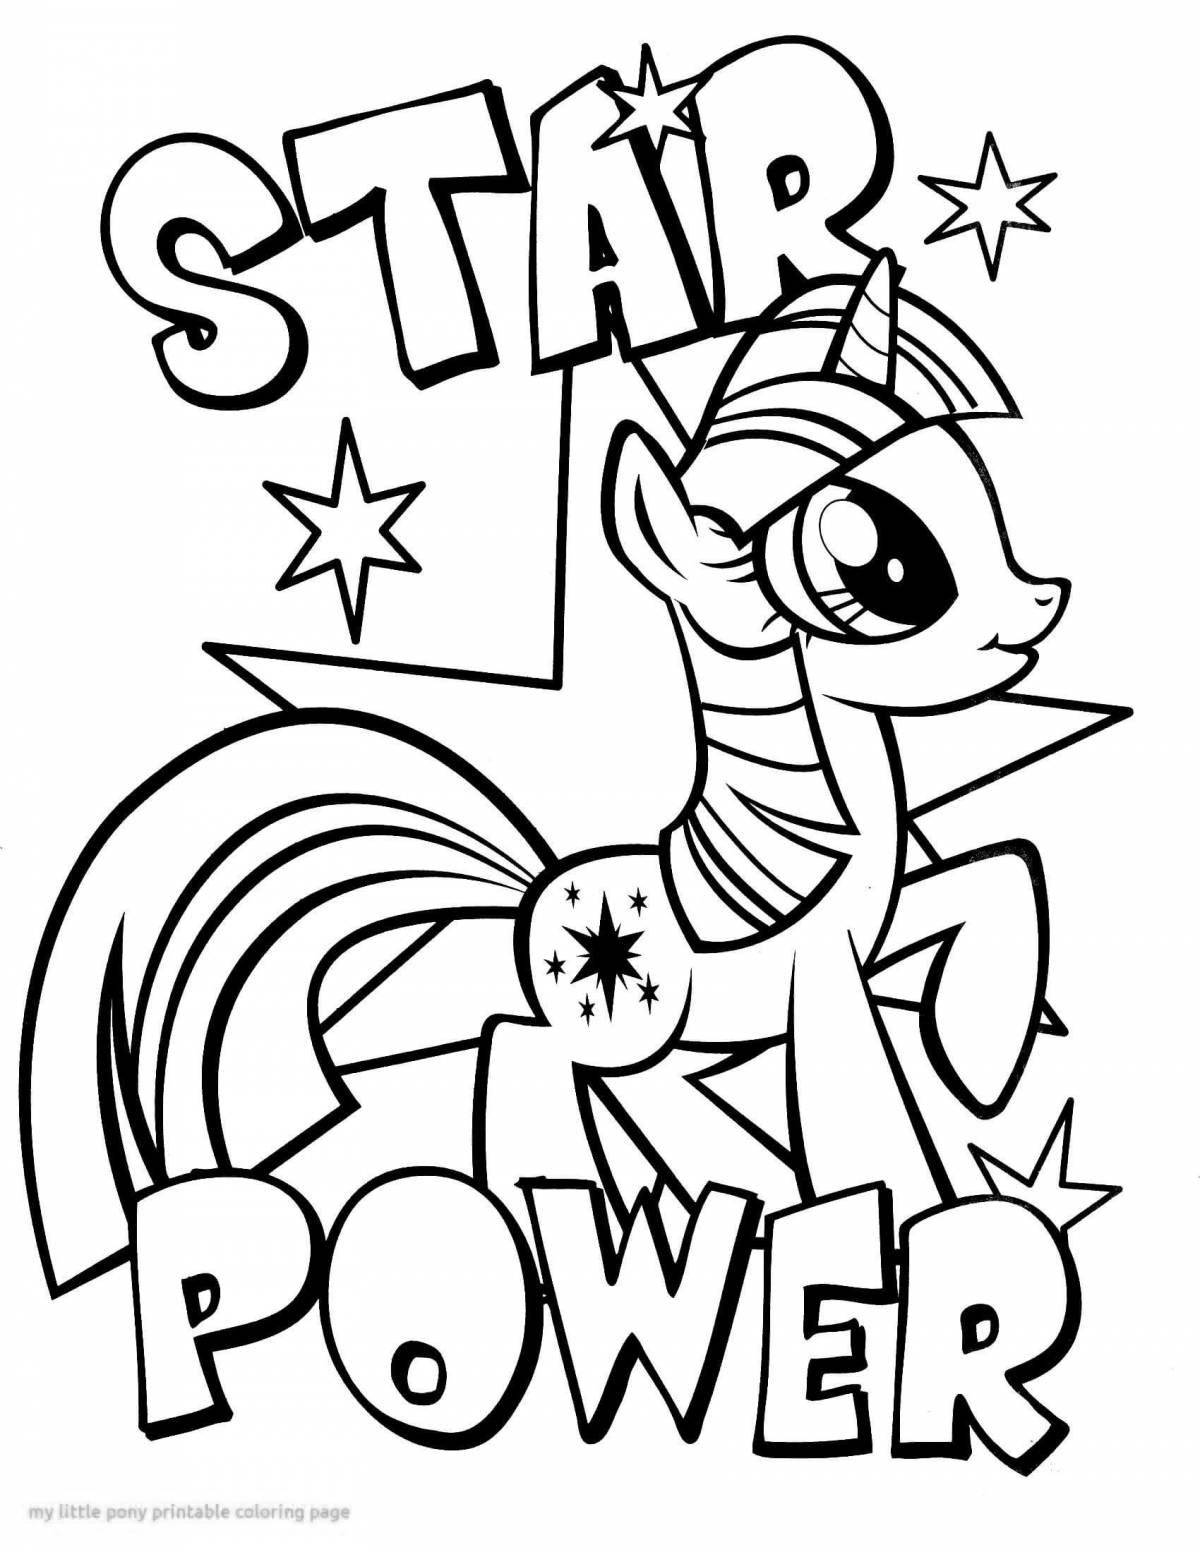 Coloring page sweet pony